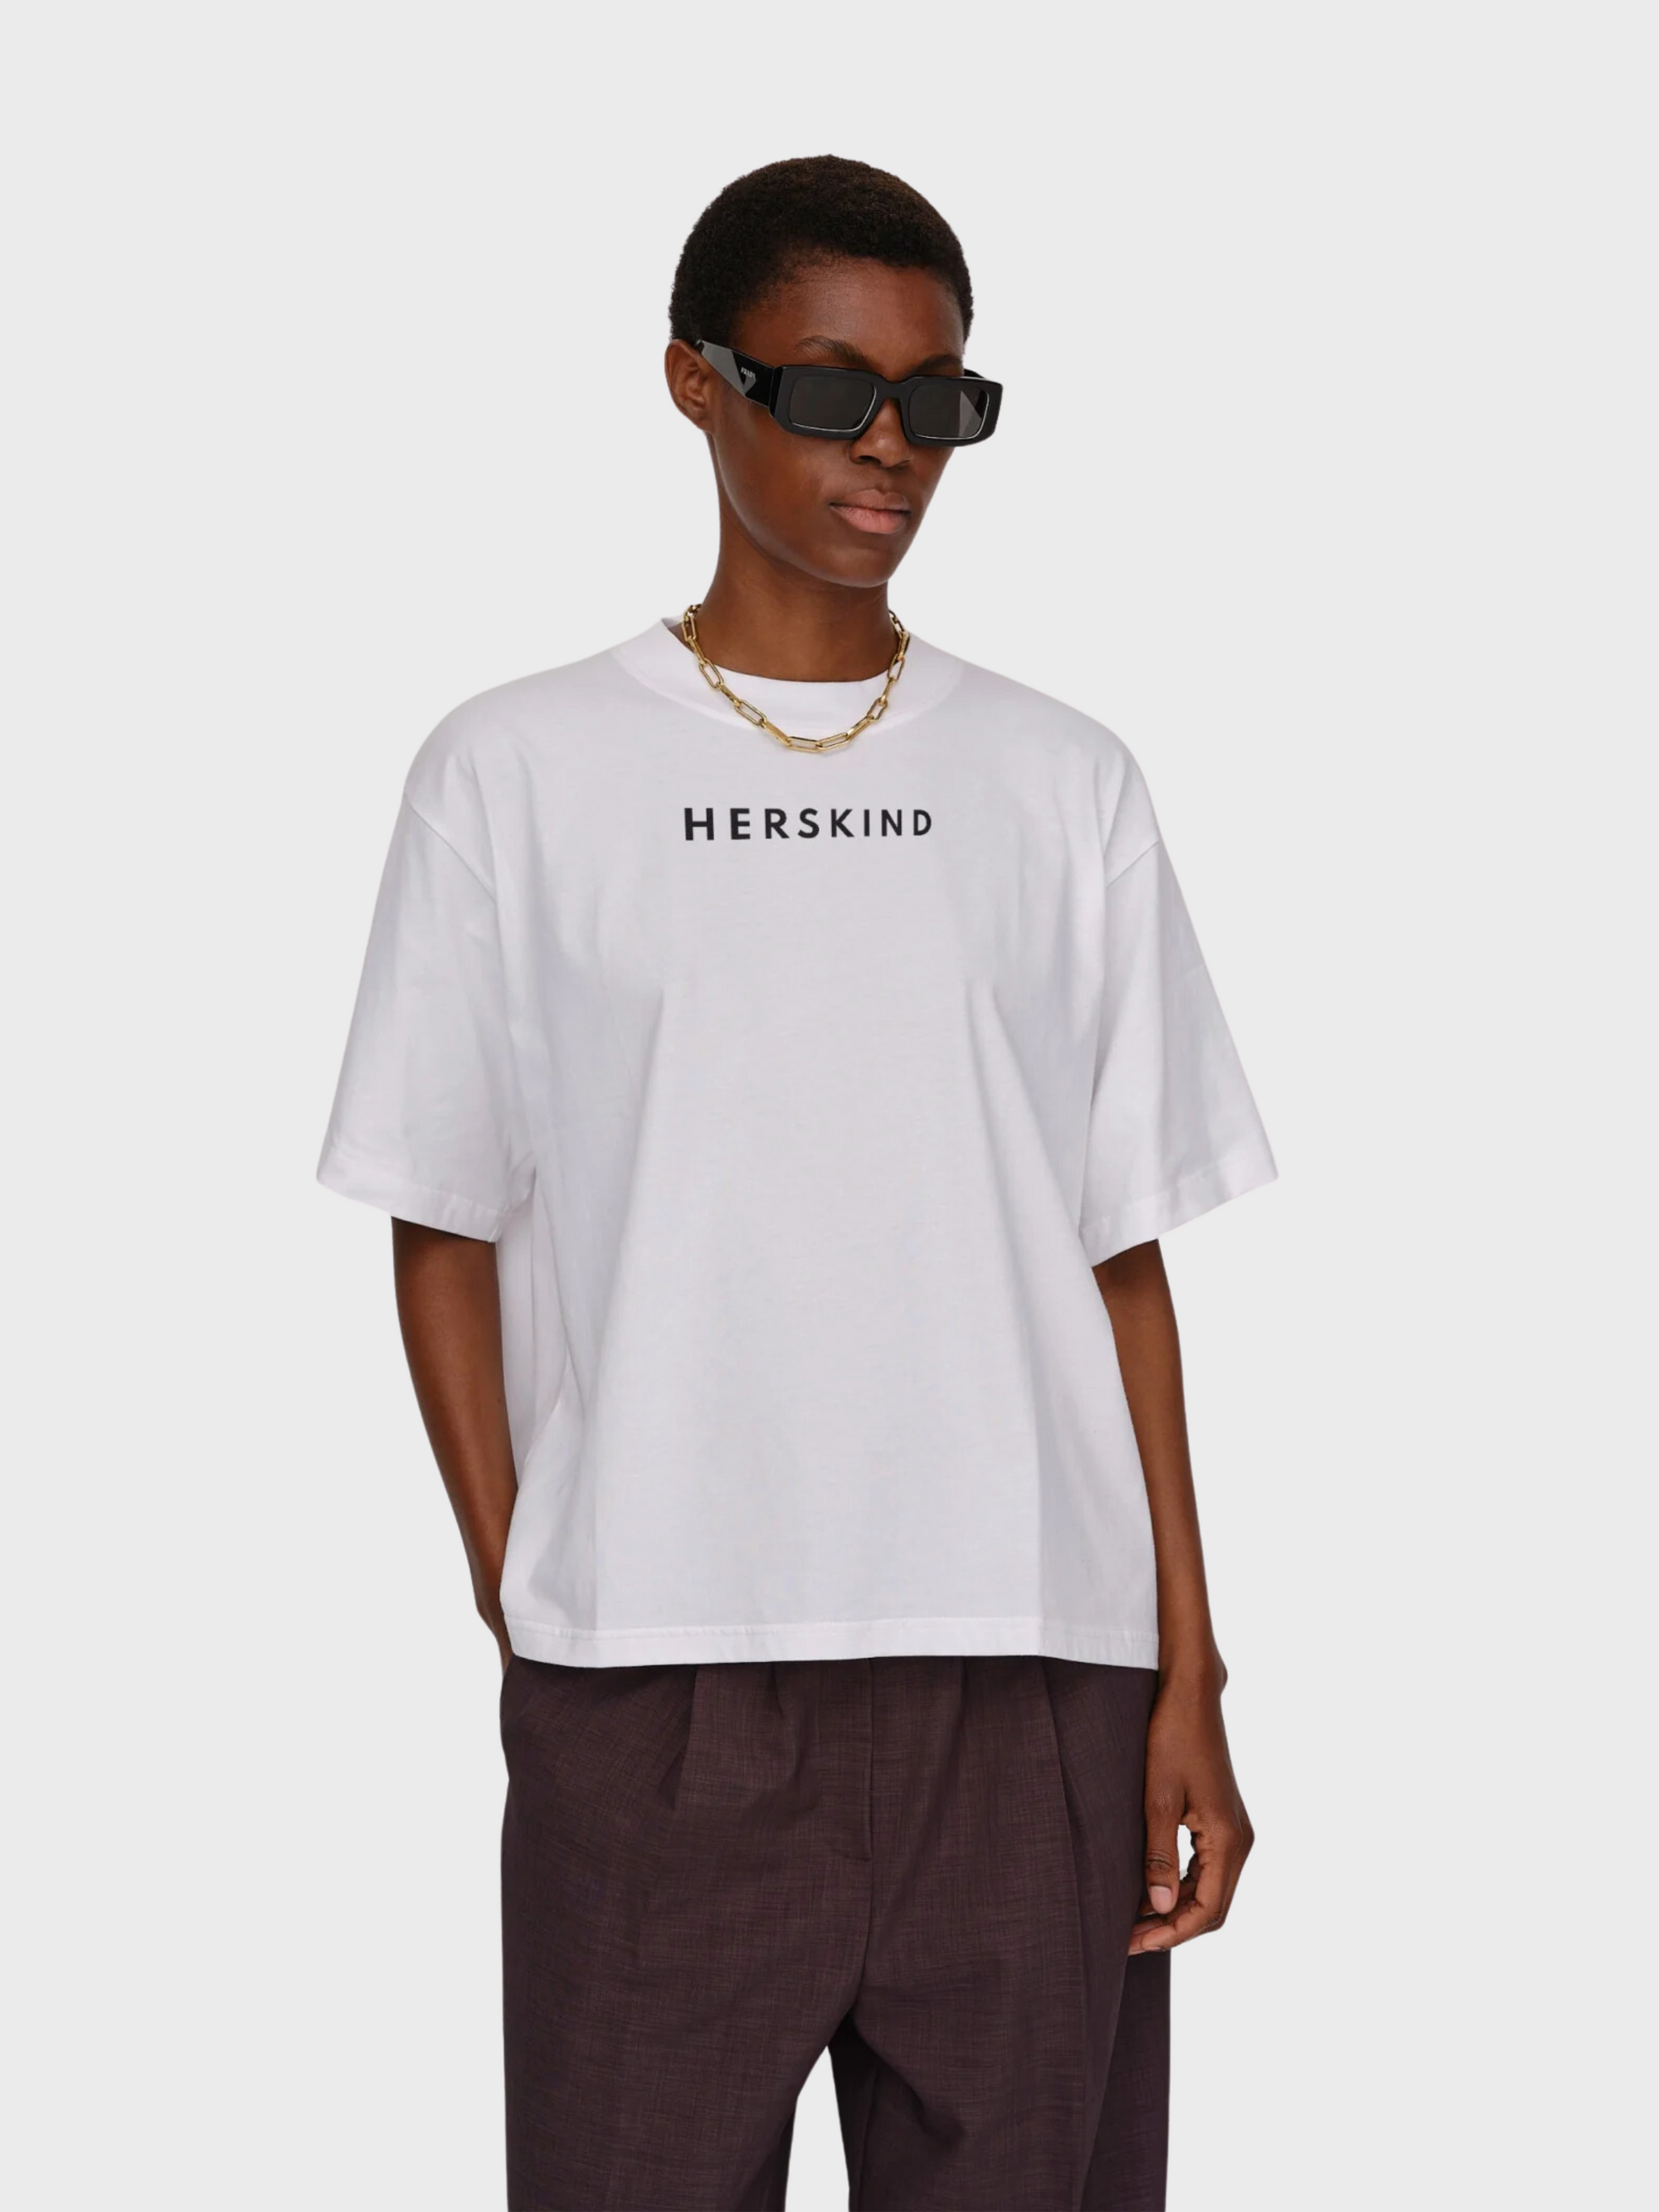 Herskind OS T-Shirt White Logo-T-Shirts-West of Woodward Boutique-Vancouver-Canada